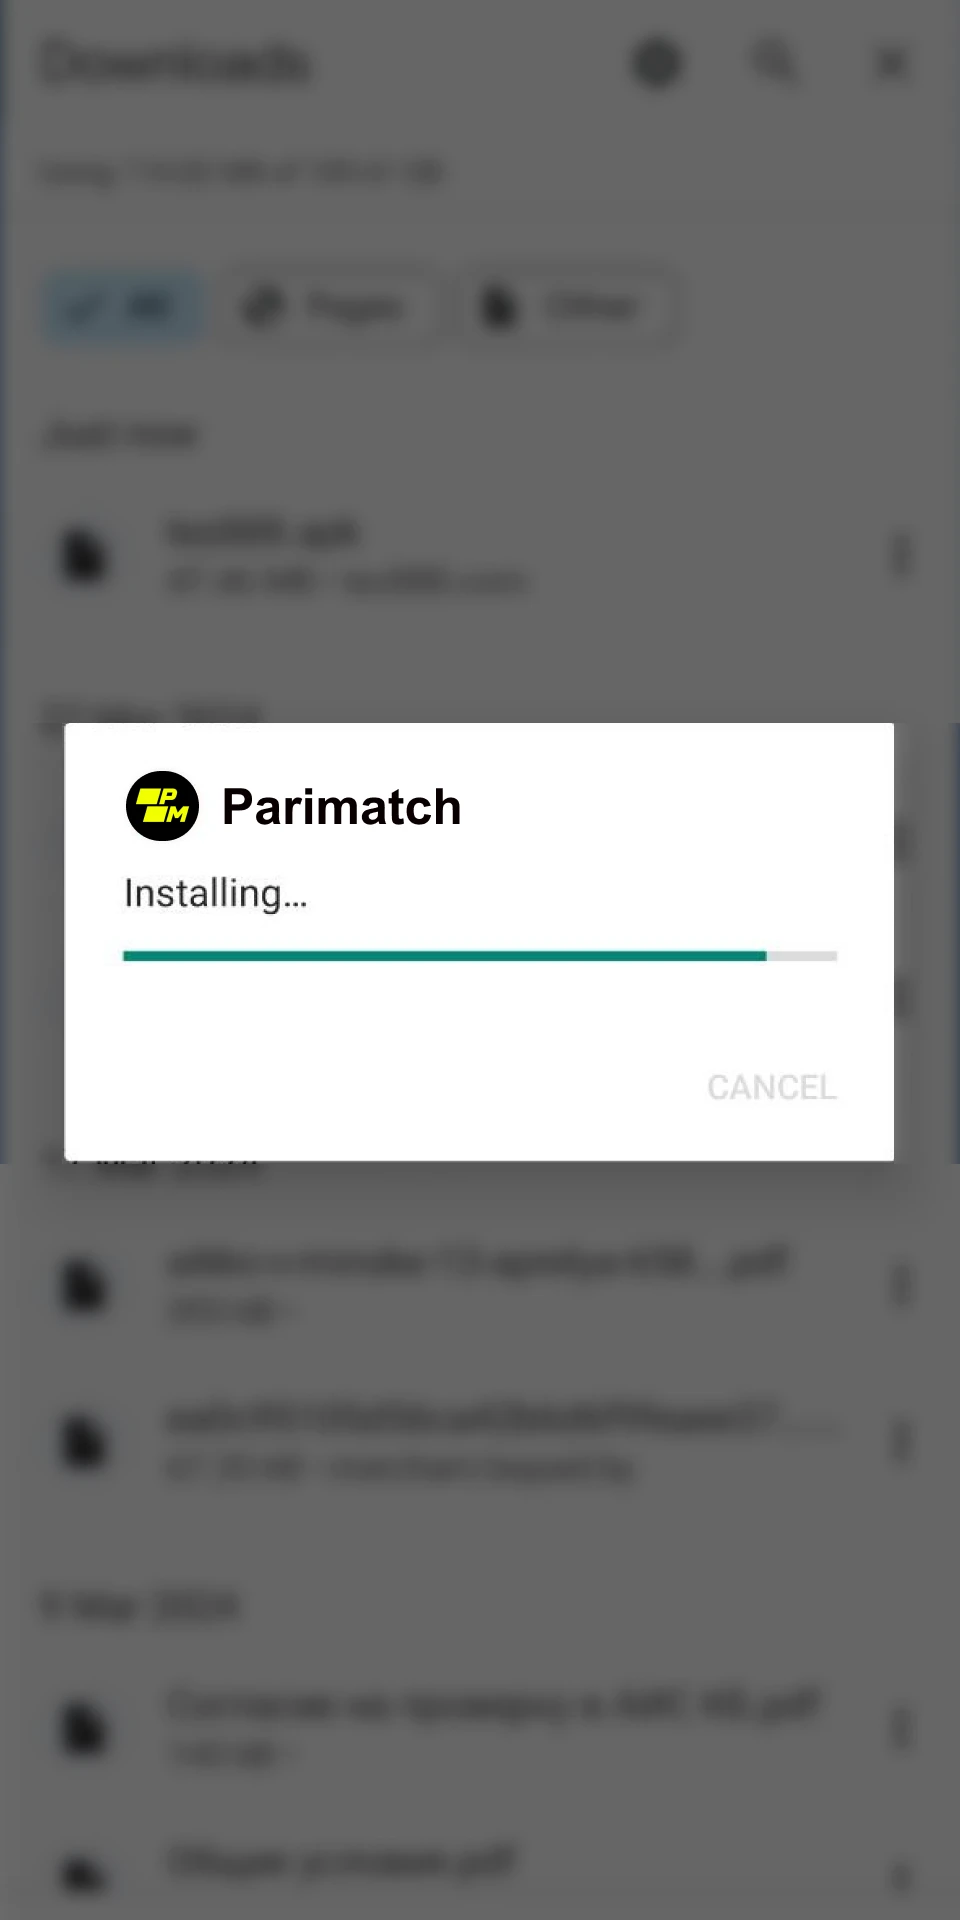 Install the Parimatch app on your Android device and use it anywhere.